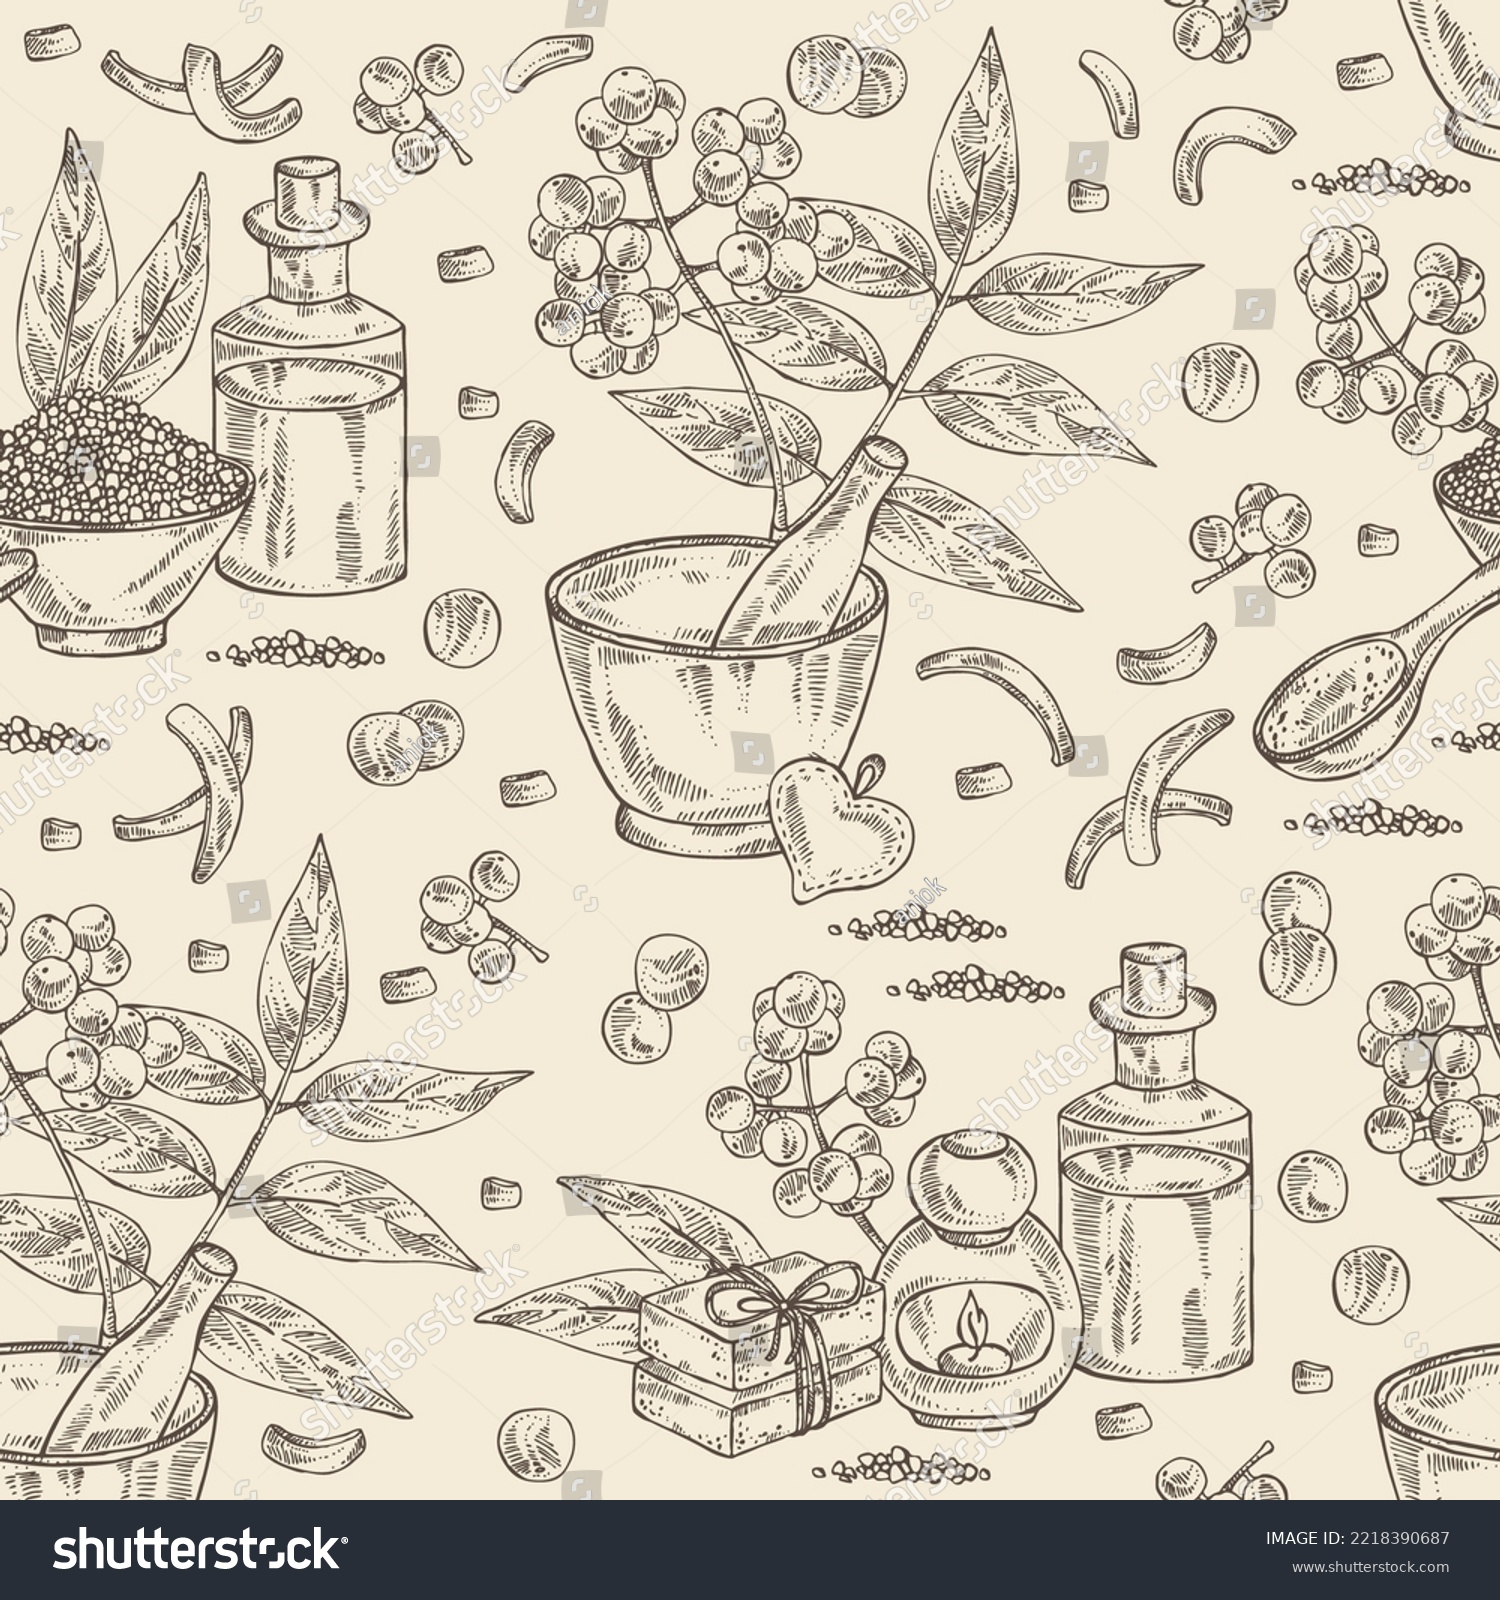 SVG of Seamless pattern with amur cork tree: amur cork berries, plant and amur cork tree bark. Phellodendron amurense. Oil, soap and bath salt . Cosmetics and medical plant. Vector hand drawn  svg